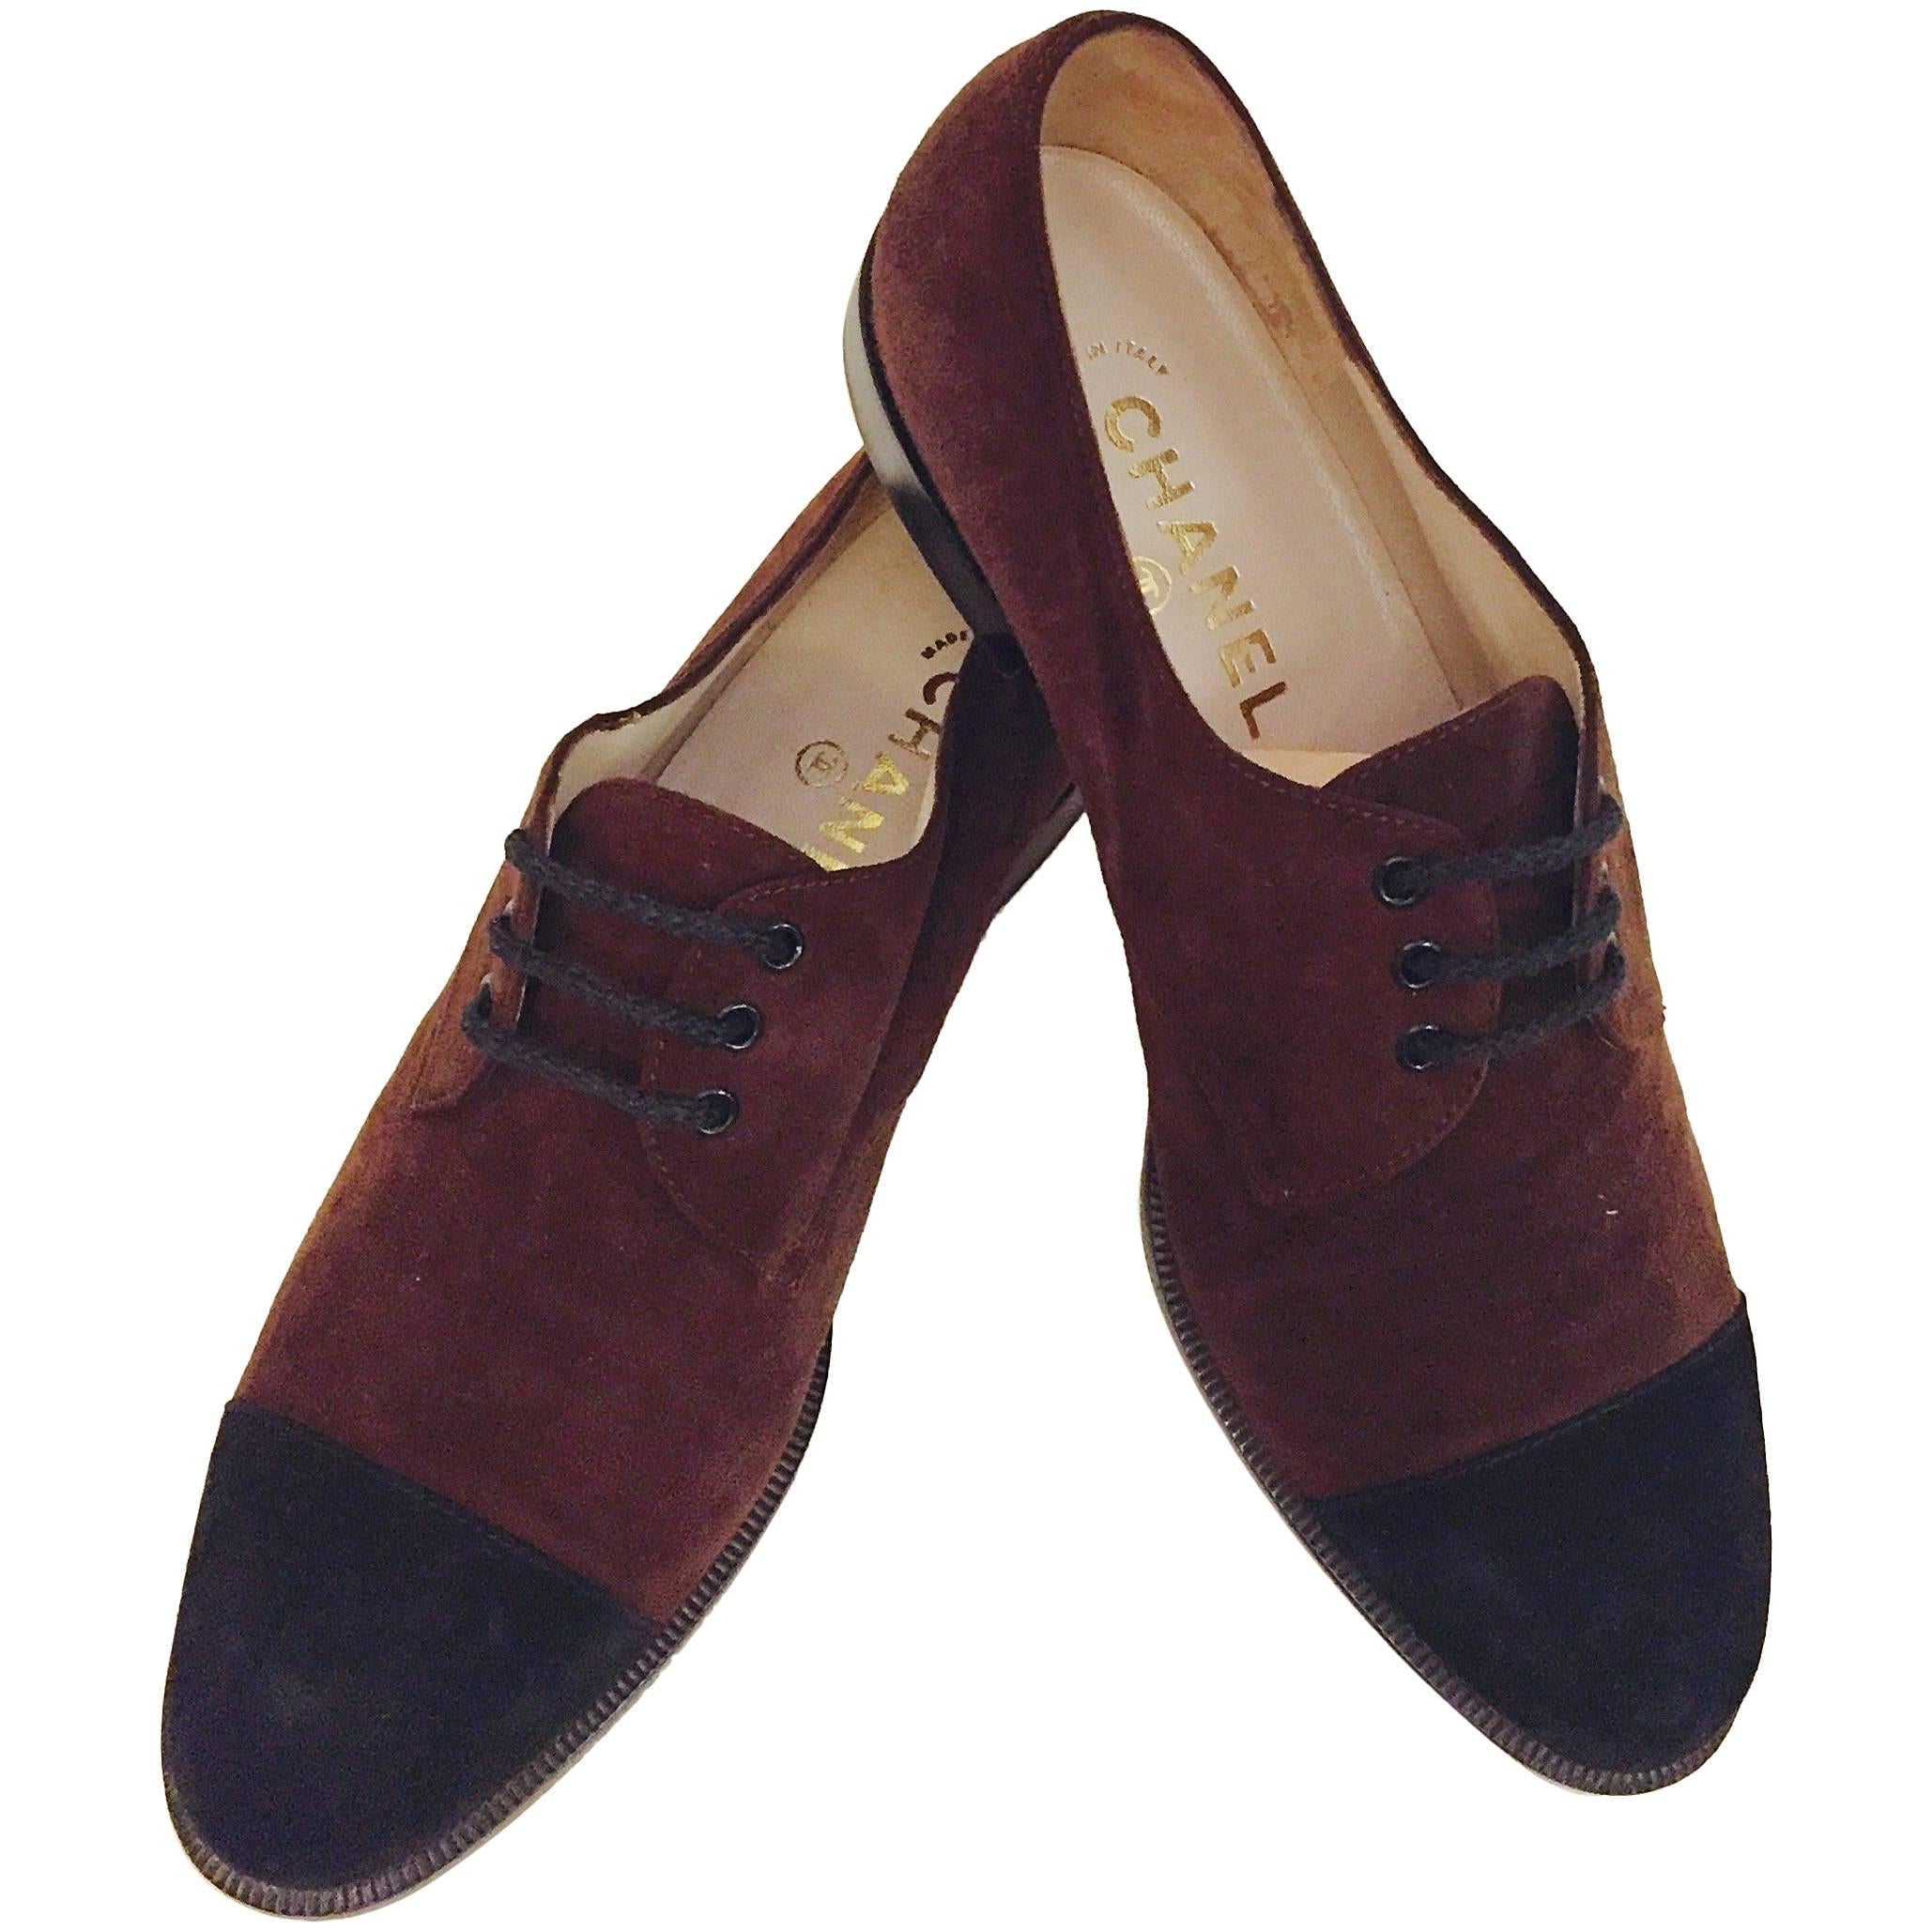 Chanel Brown Suede Oxford Shoes With Black Suede Cap Toe